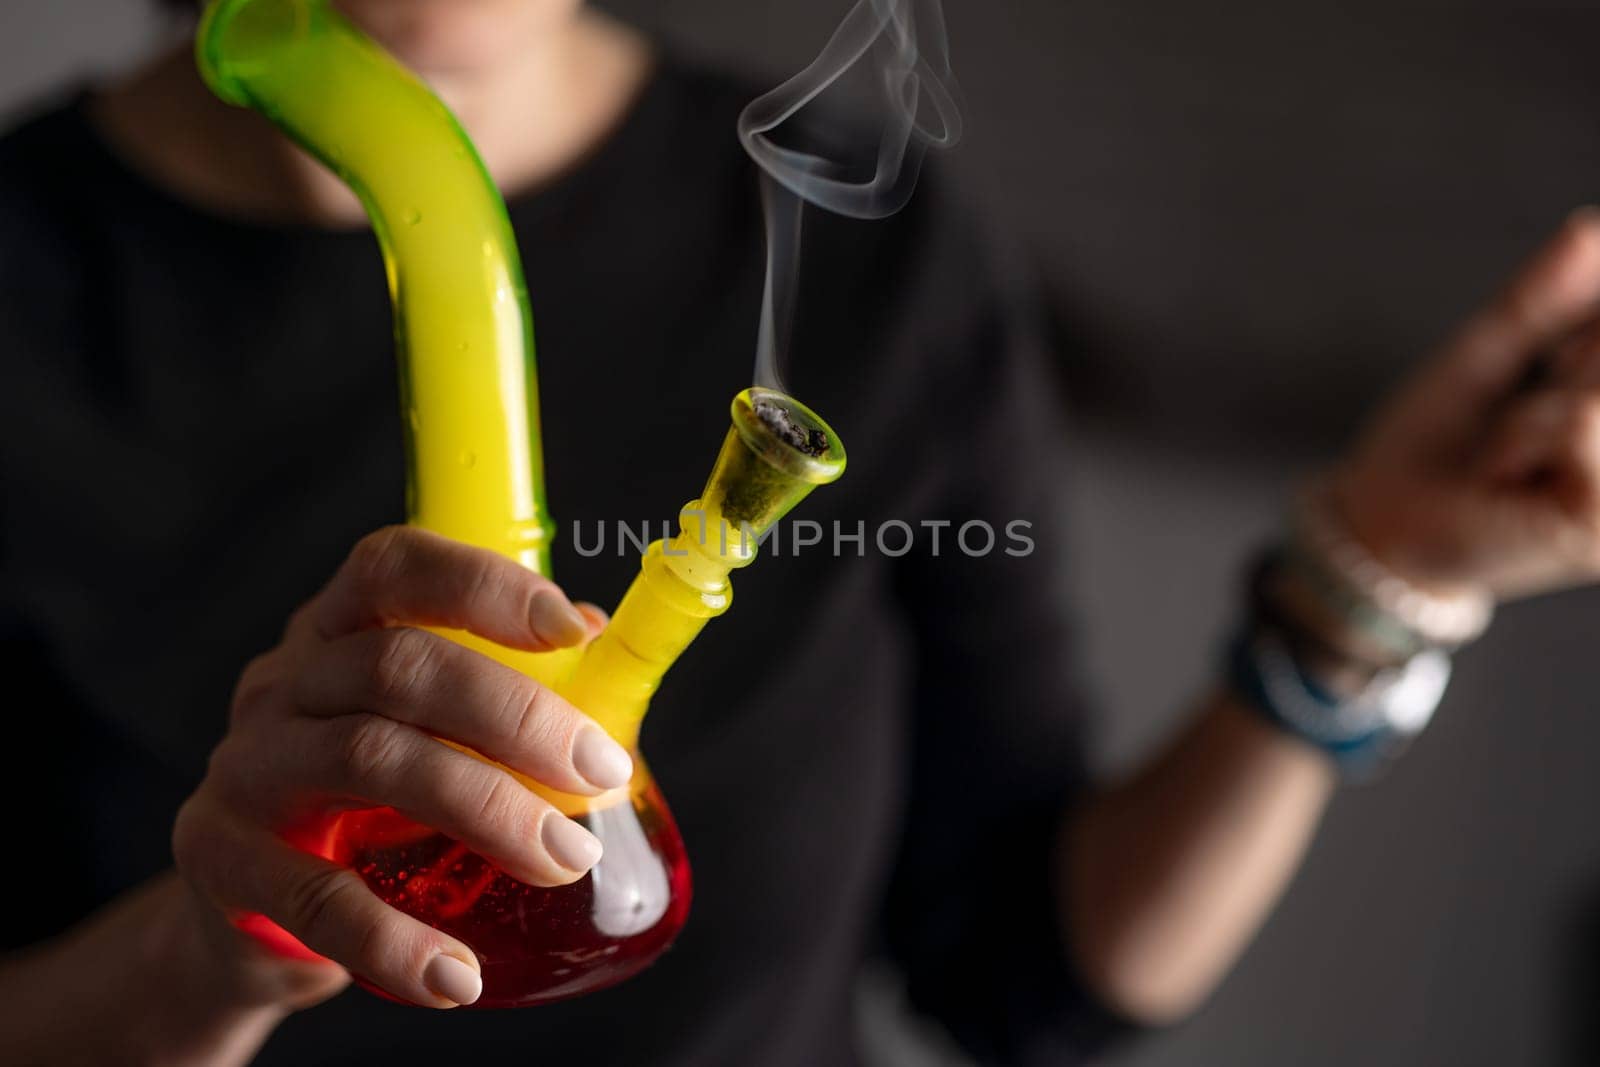 Woman Smokes Cannabis With Bong In Close-Up View